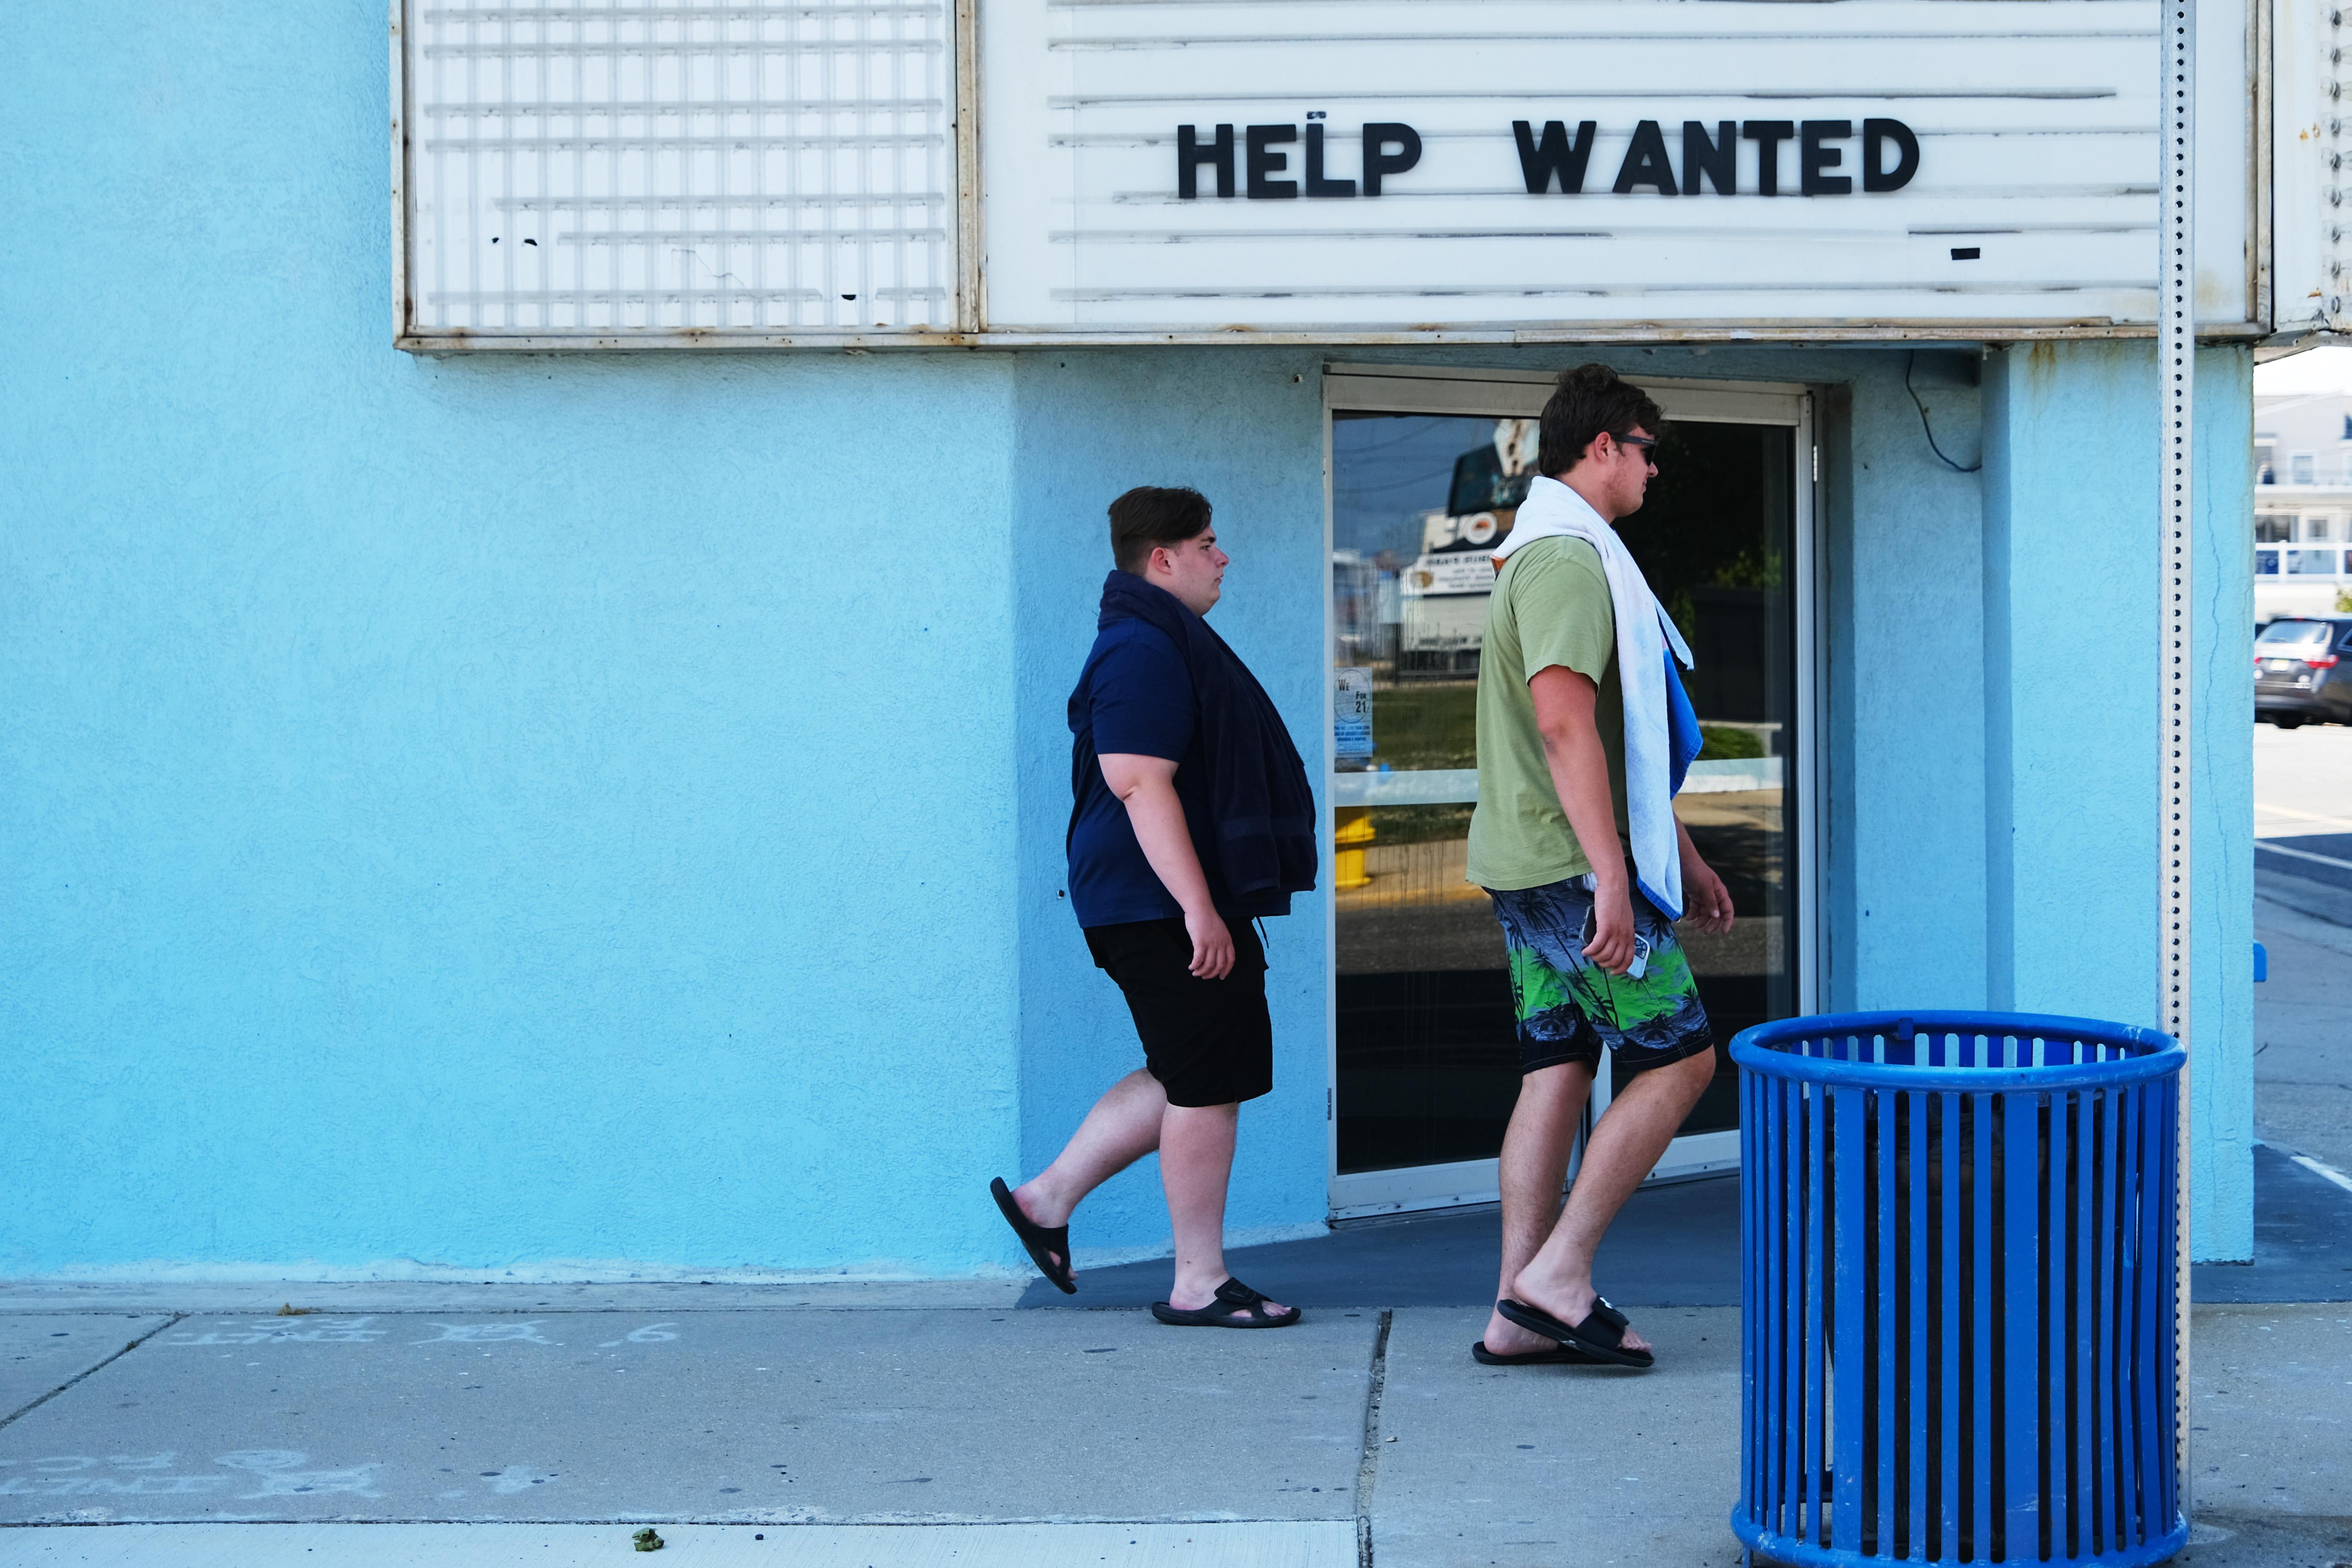 A help wanted sign is displayed outside of a business near the boardwalk days before the Memorial Day weekend, the unofficial start of summer, in the shore community of Wildwood on May 27, 2021 in Wildwood, New Jersey. Wildwood, like many beach communities throughout the United States, is looking for a successful and busy summer season after staying mostly closed or partially open last summer due to Covid-19 restrictions. Many resort community retail businesses are also suffering from a shortage of labor as some workers are choosing to stay home and others have changed career paths.  (Photo by Spencer Platt/Getty Images)